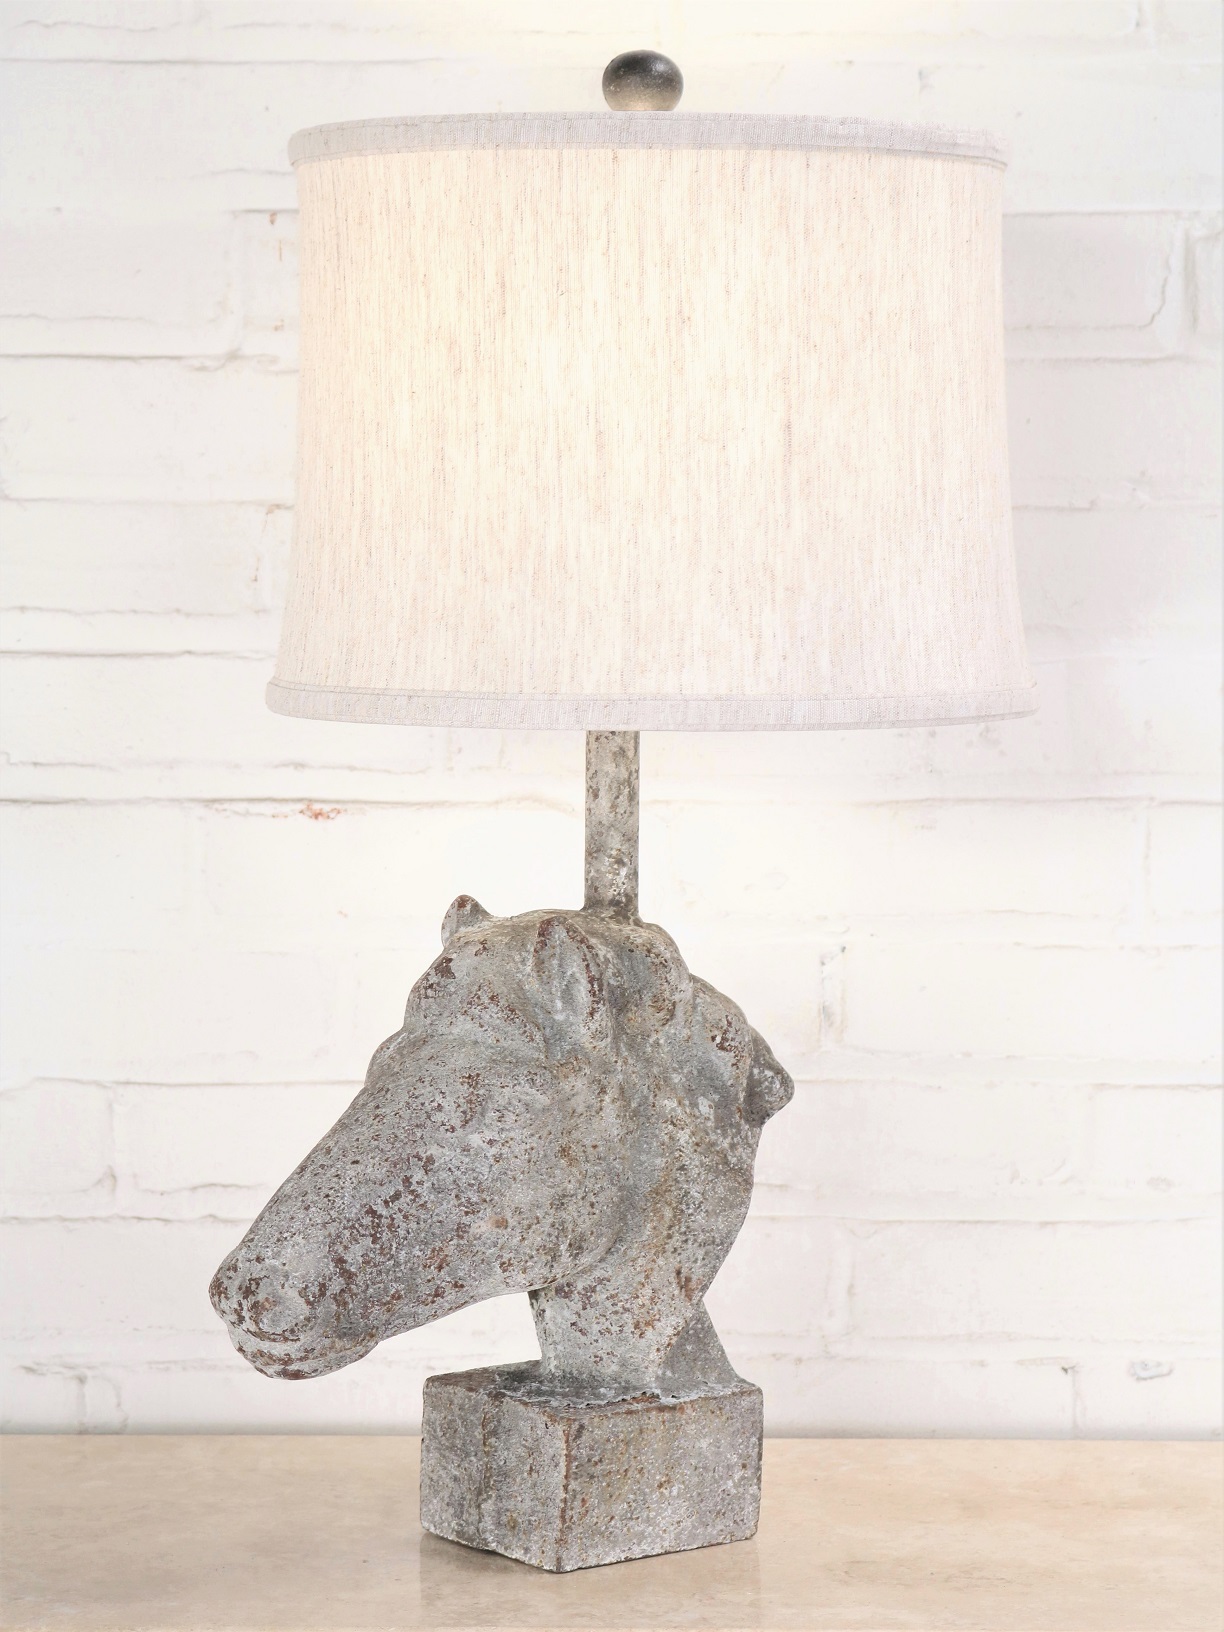 Horse head custom iron table lamp with a 12 inch linen drum lamp shade.